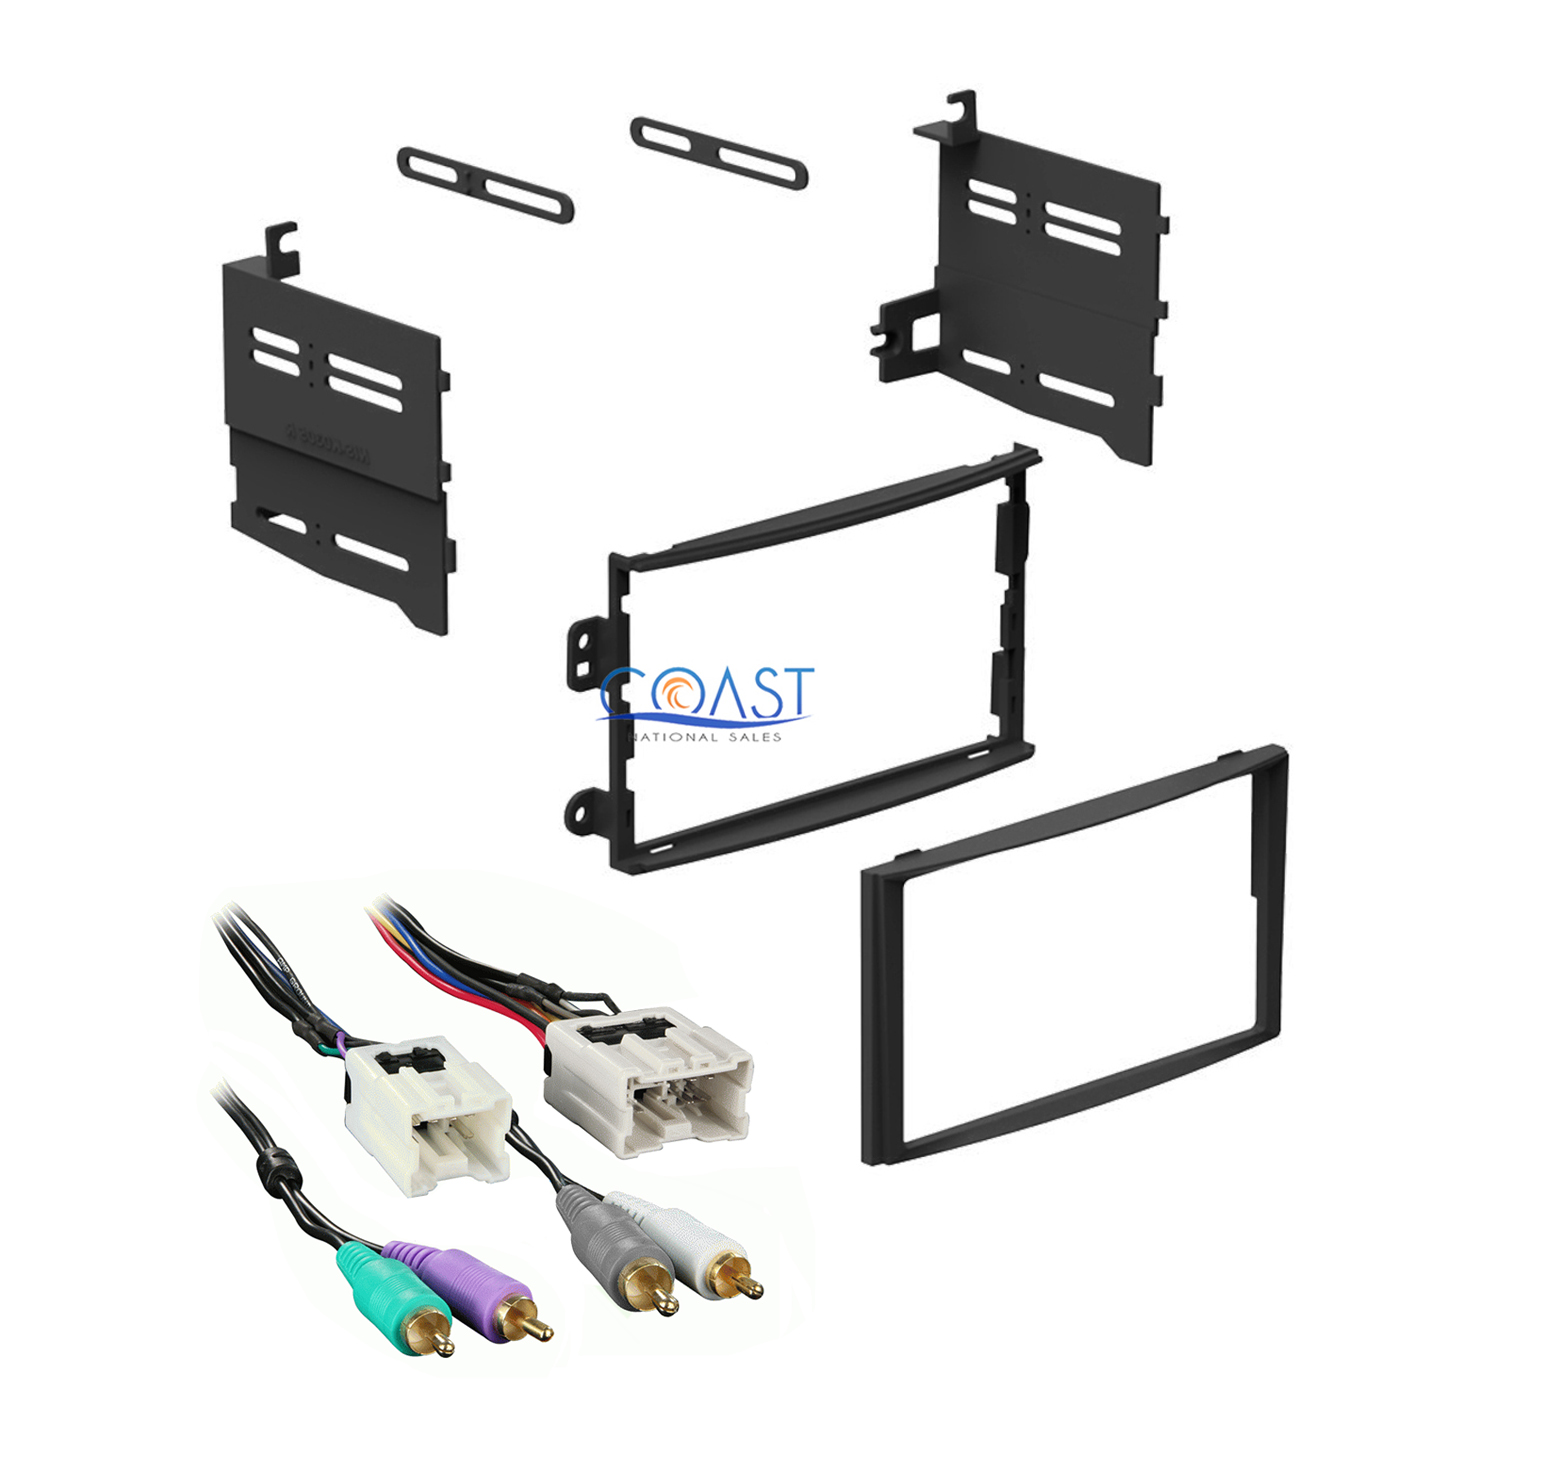 Double DIN Car Stereo Dash Kit Wire Harness for 2003-2005 Nissan 350Z